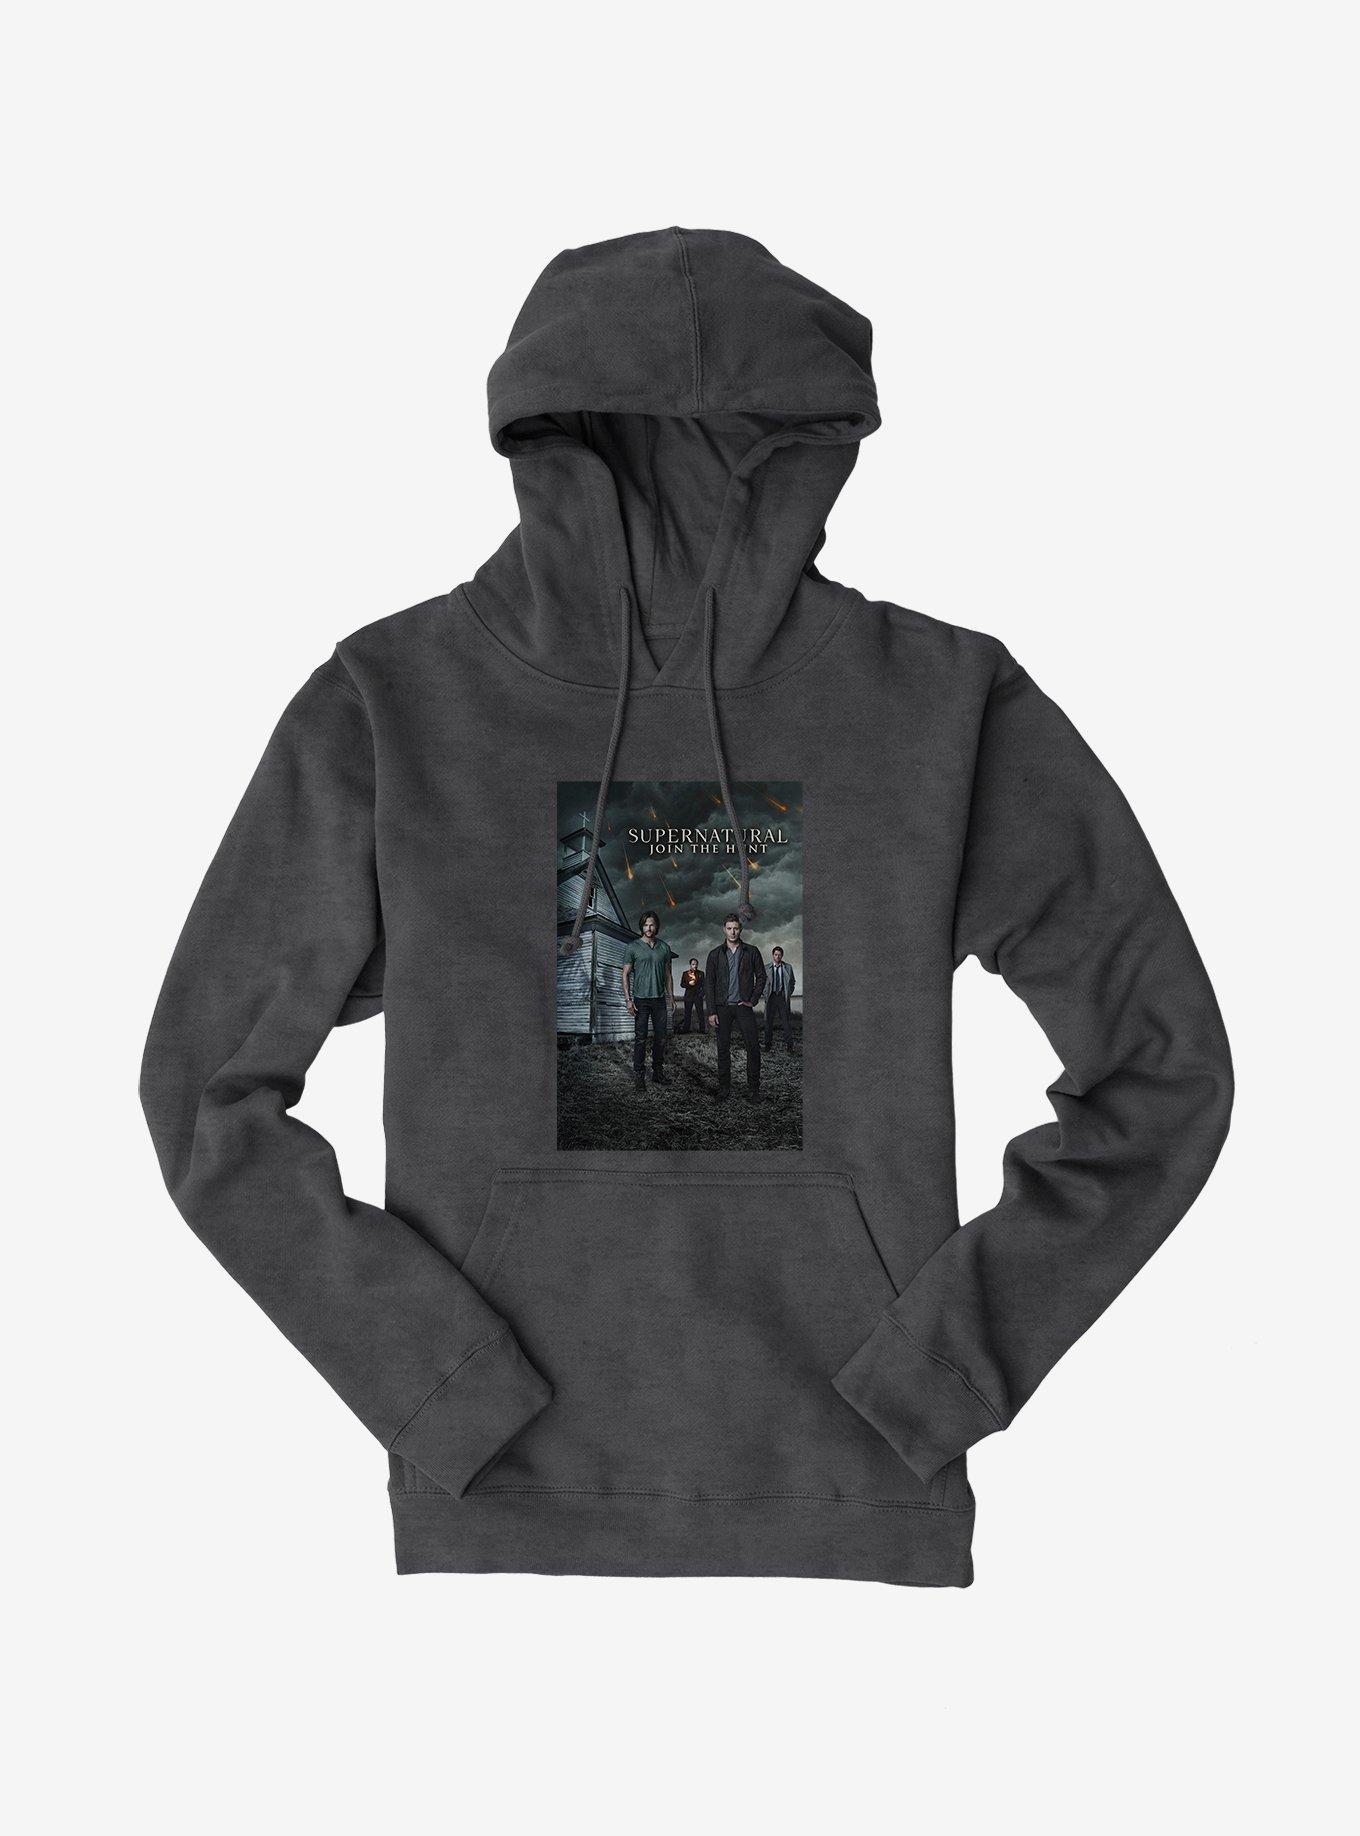 Supernatural Join The Hunt Poster Hoodie, CHARCOAL HEATHER, hi-res